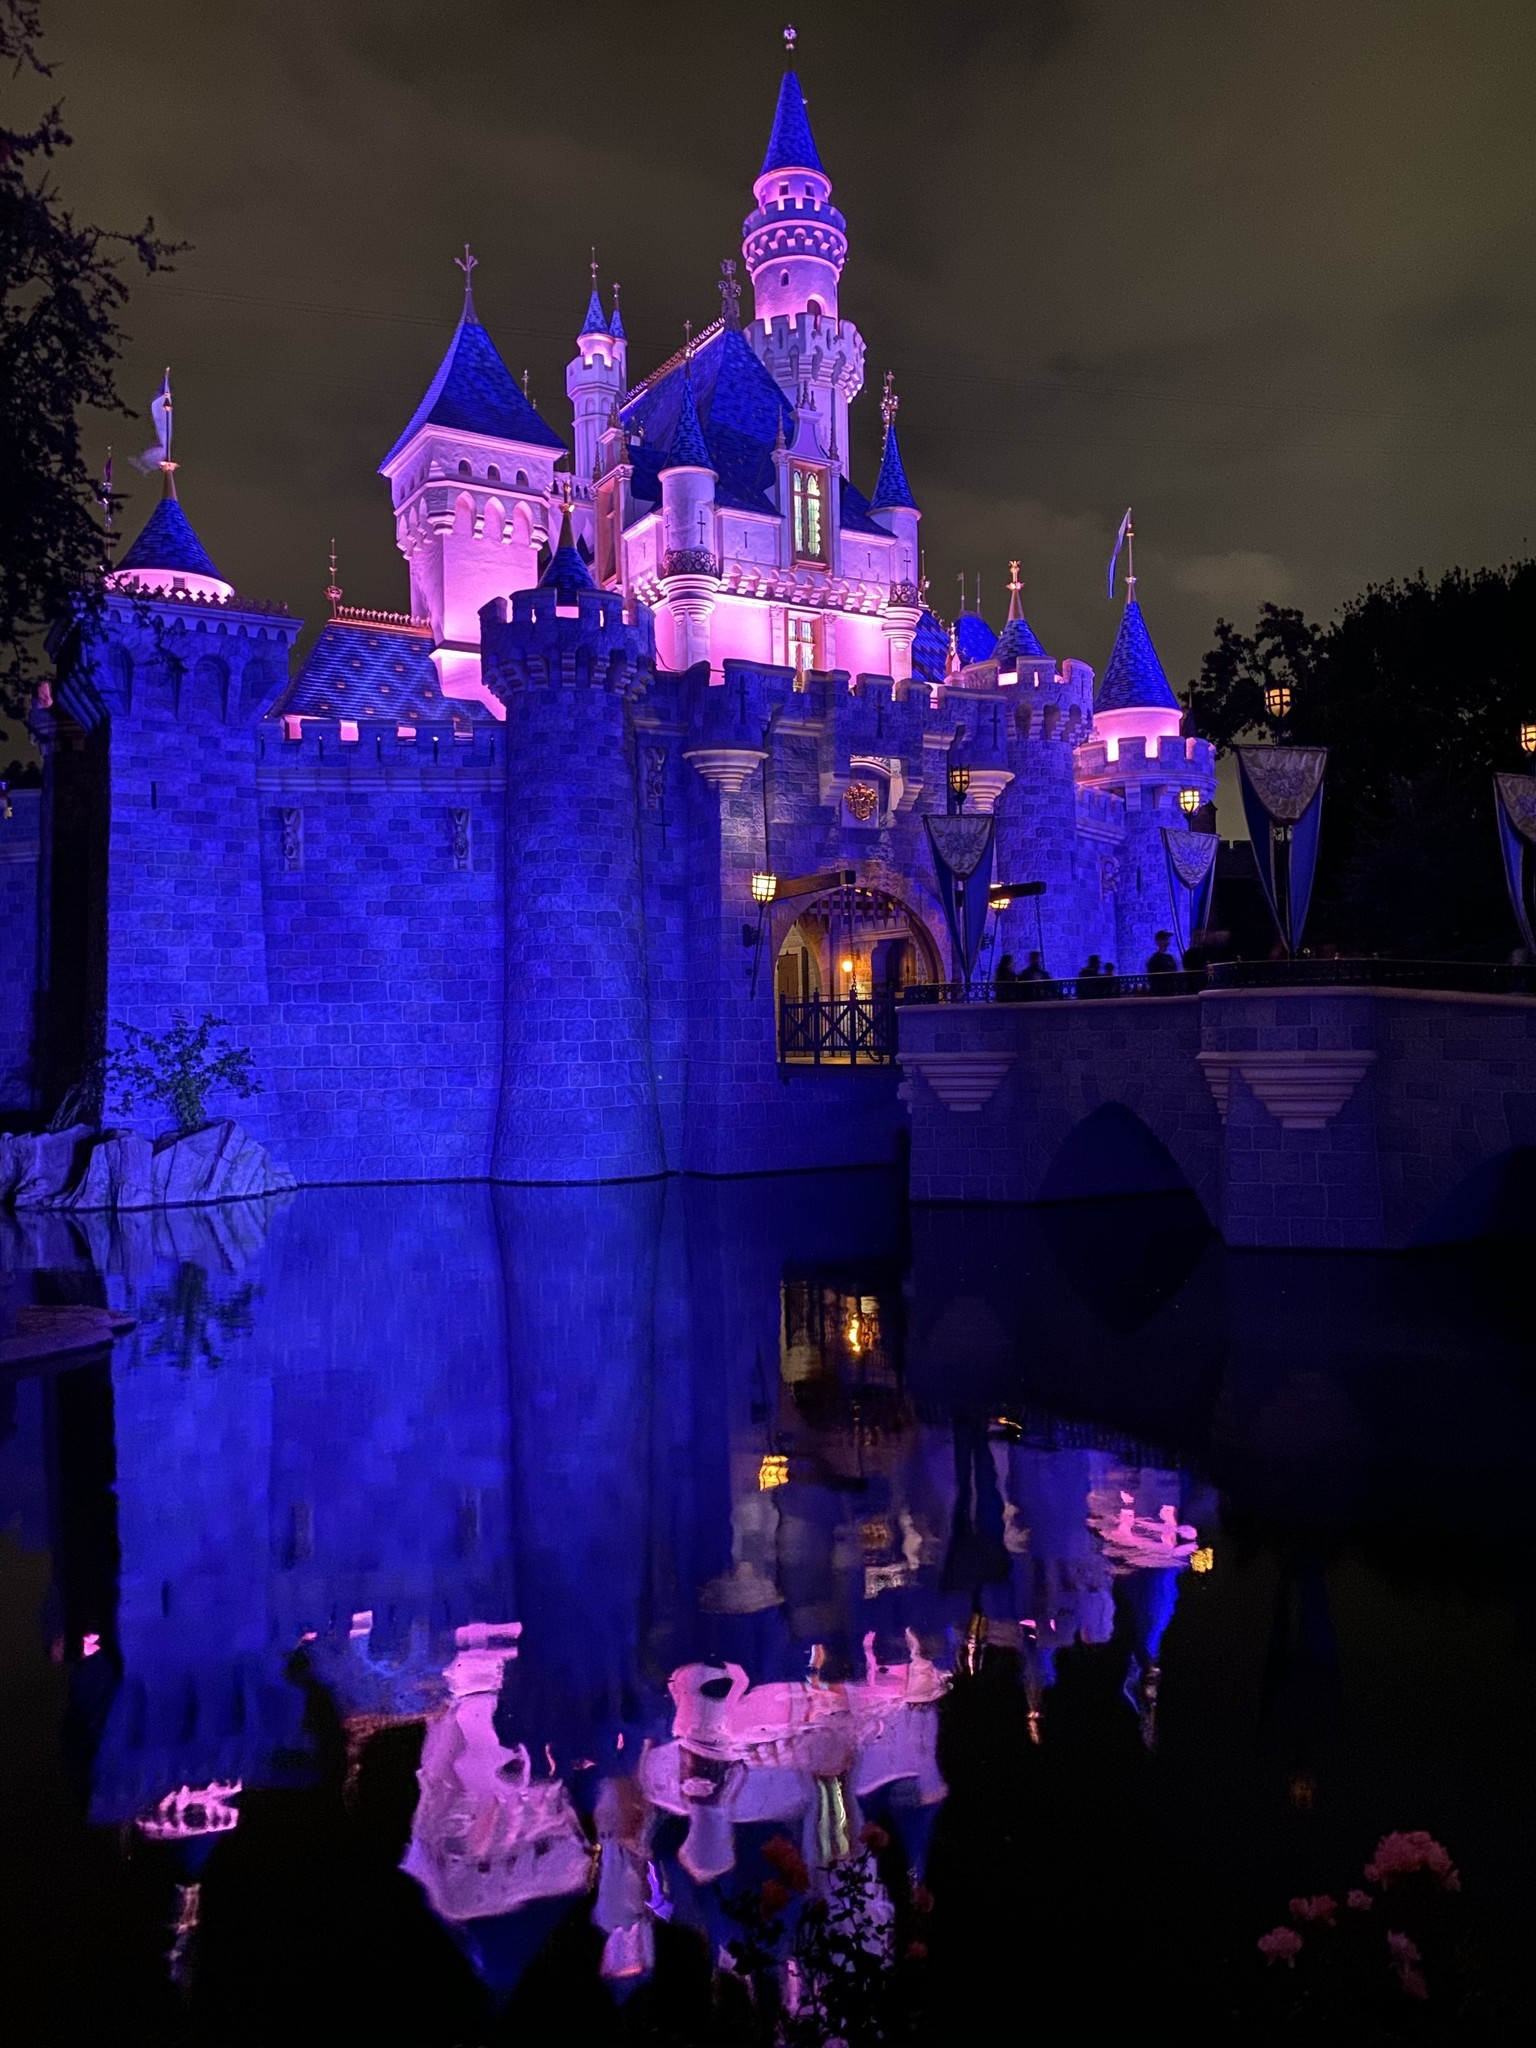 Side view of Sleeping Beauty's Castle with Night mode